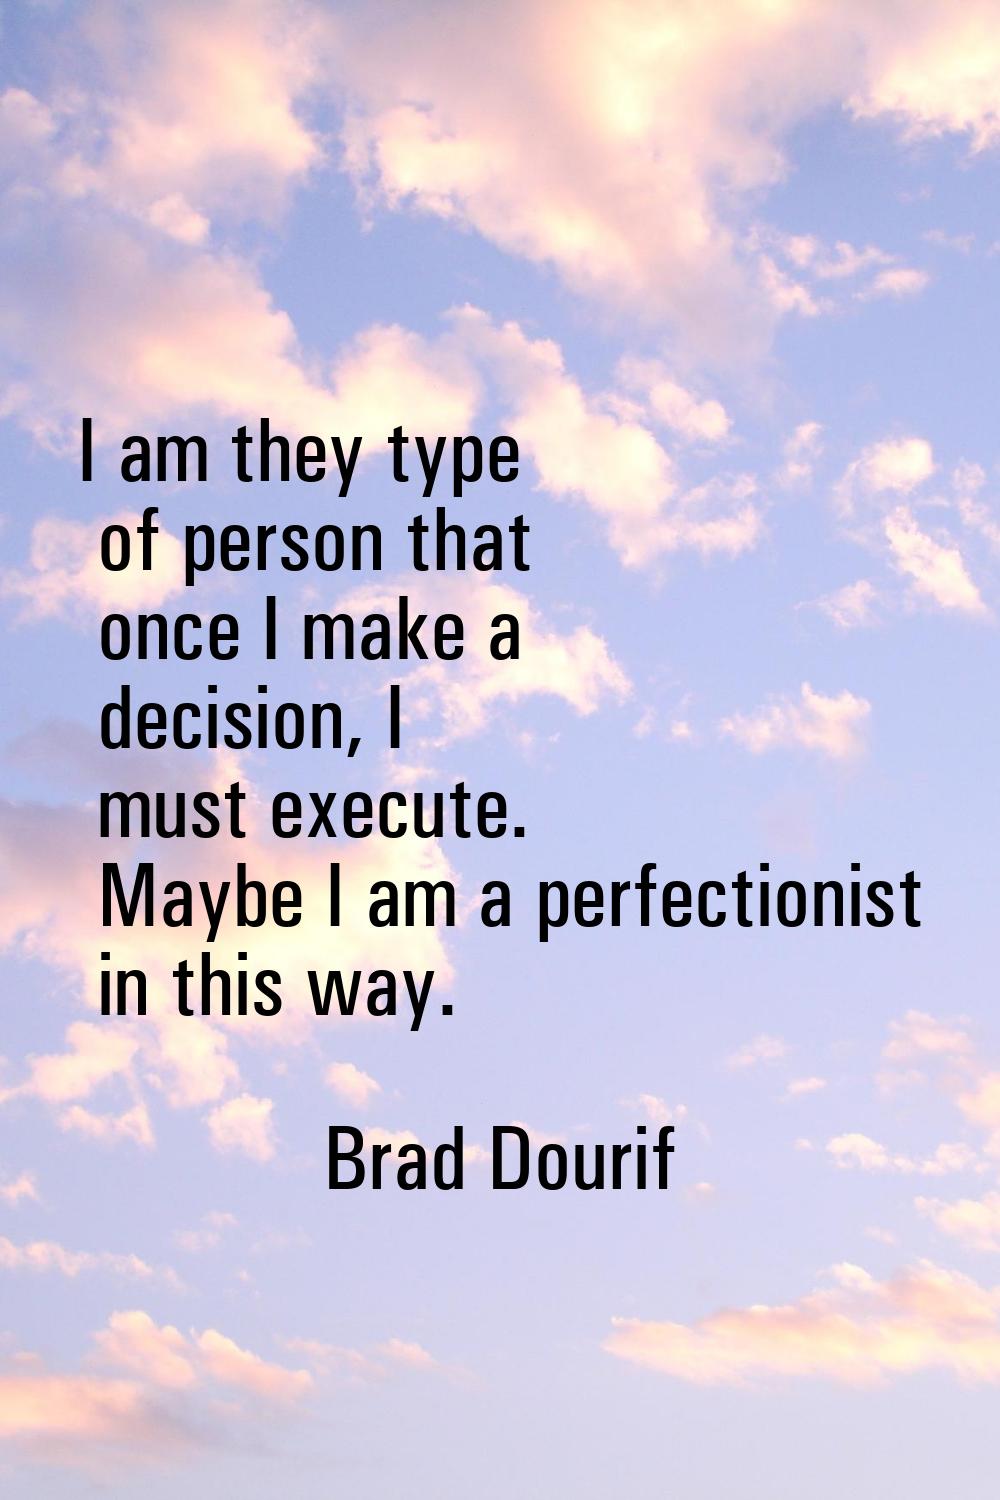 I am they type of person that once I make a decision, I must execute. Maybe I am a perfectionist in